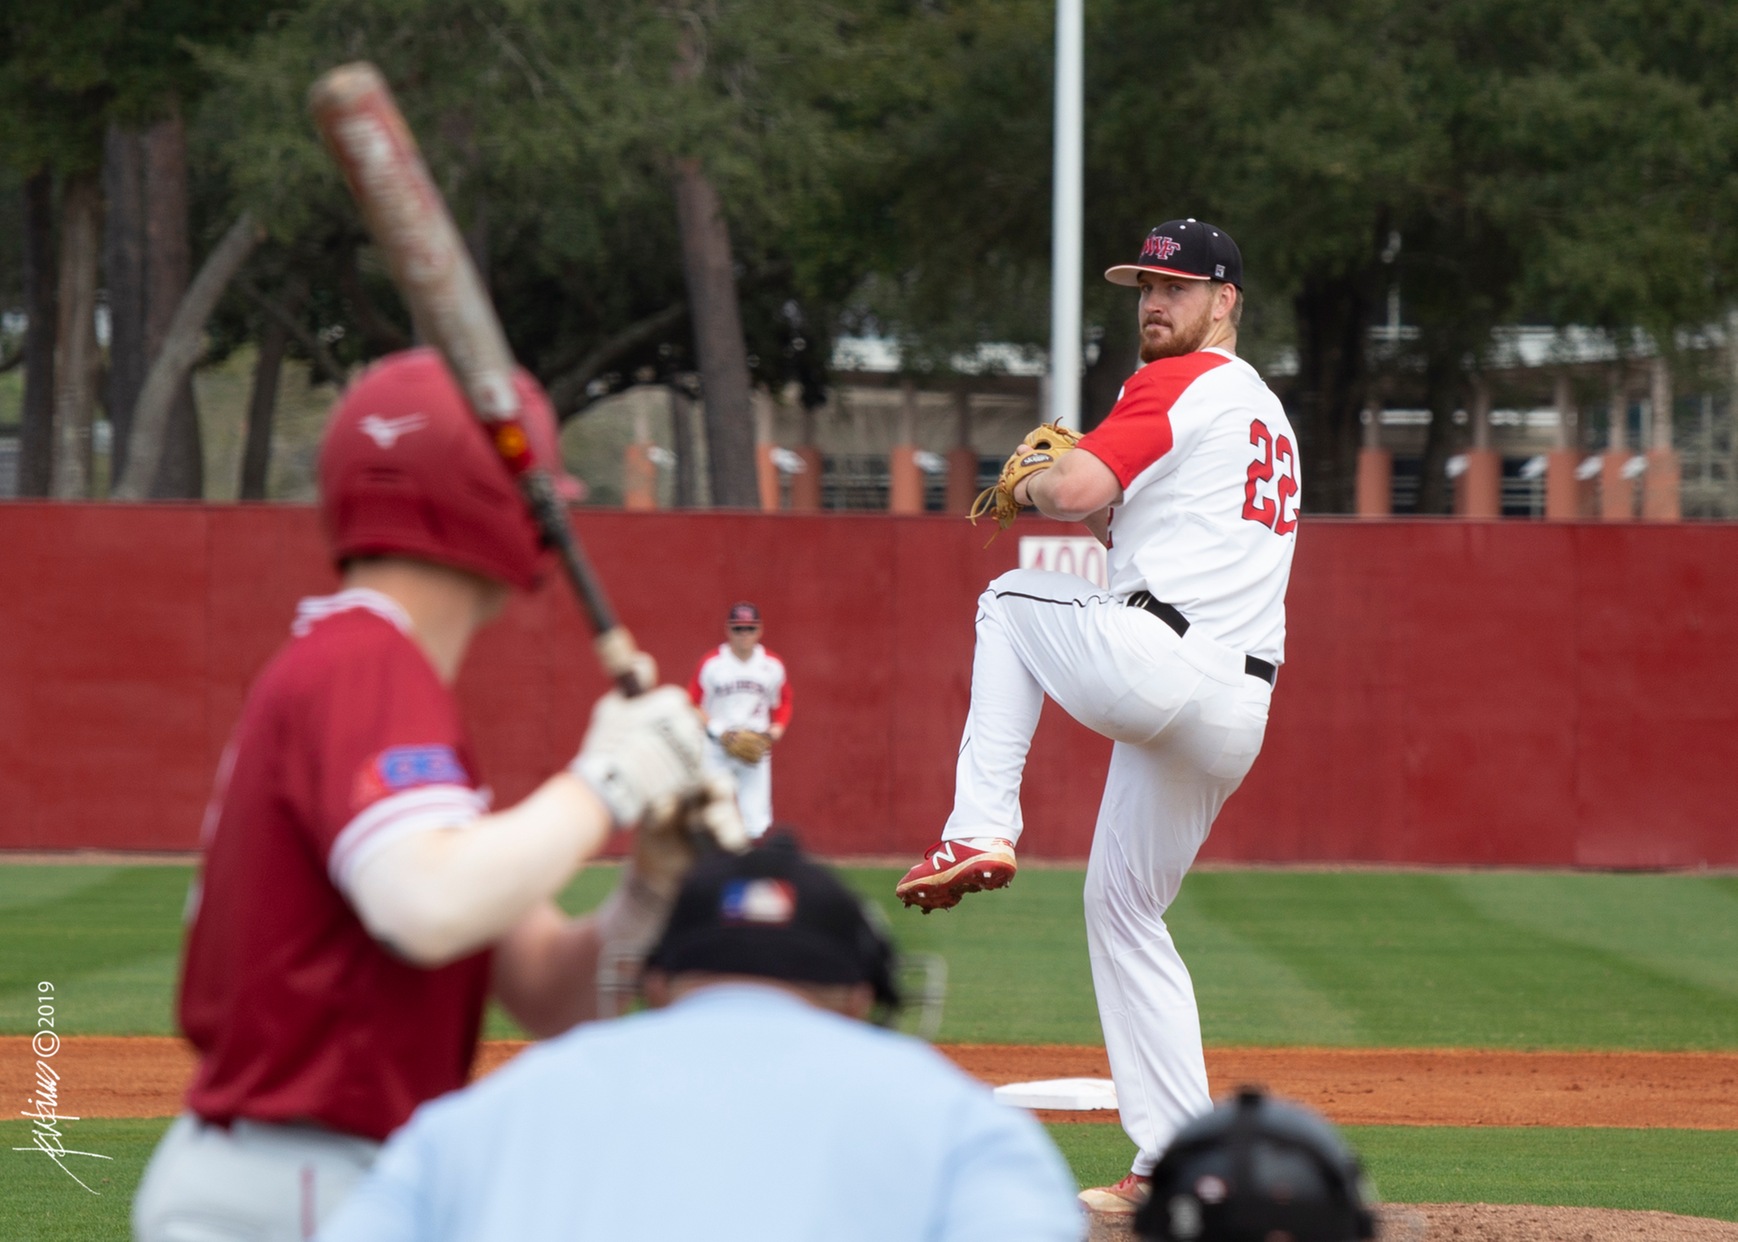 Raiders split DH with Tallahassee